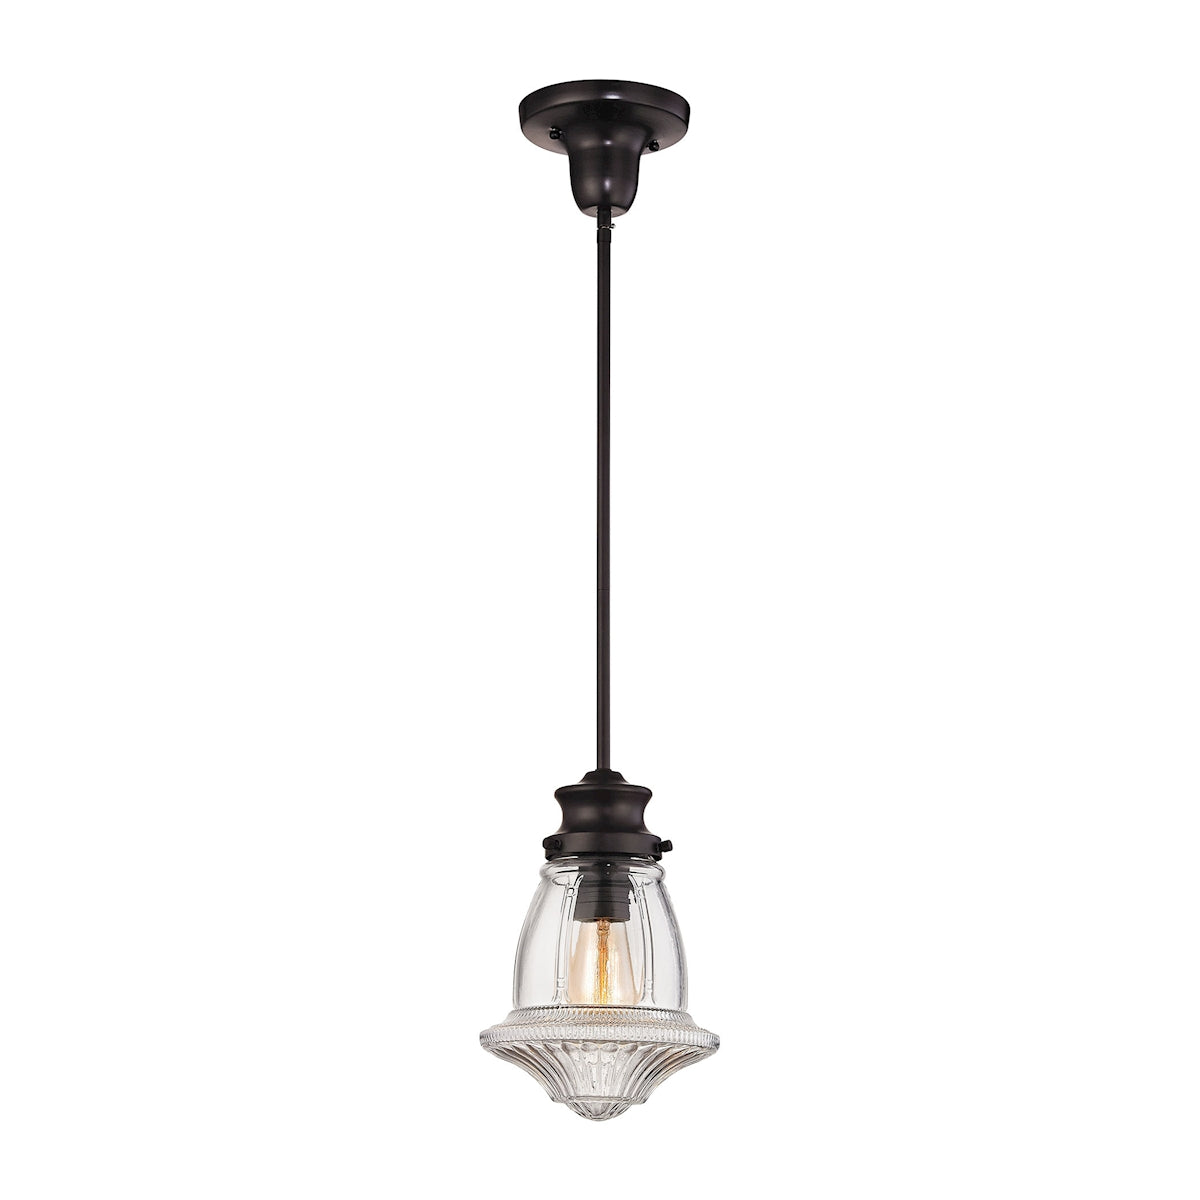 ELK Lighting 69139-1 Schoolhouse 1-Light Mini Pendant in Oil Rubbed Bronze with Reeded Clear Glass